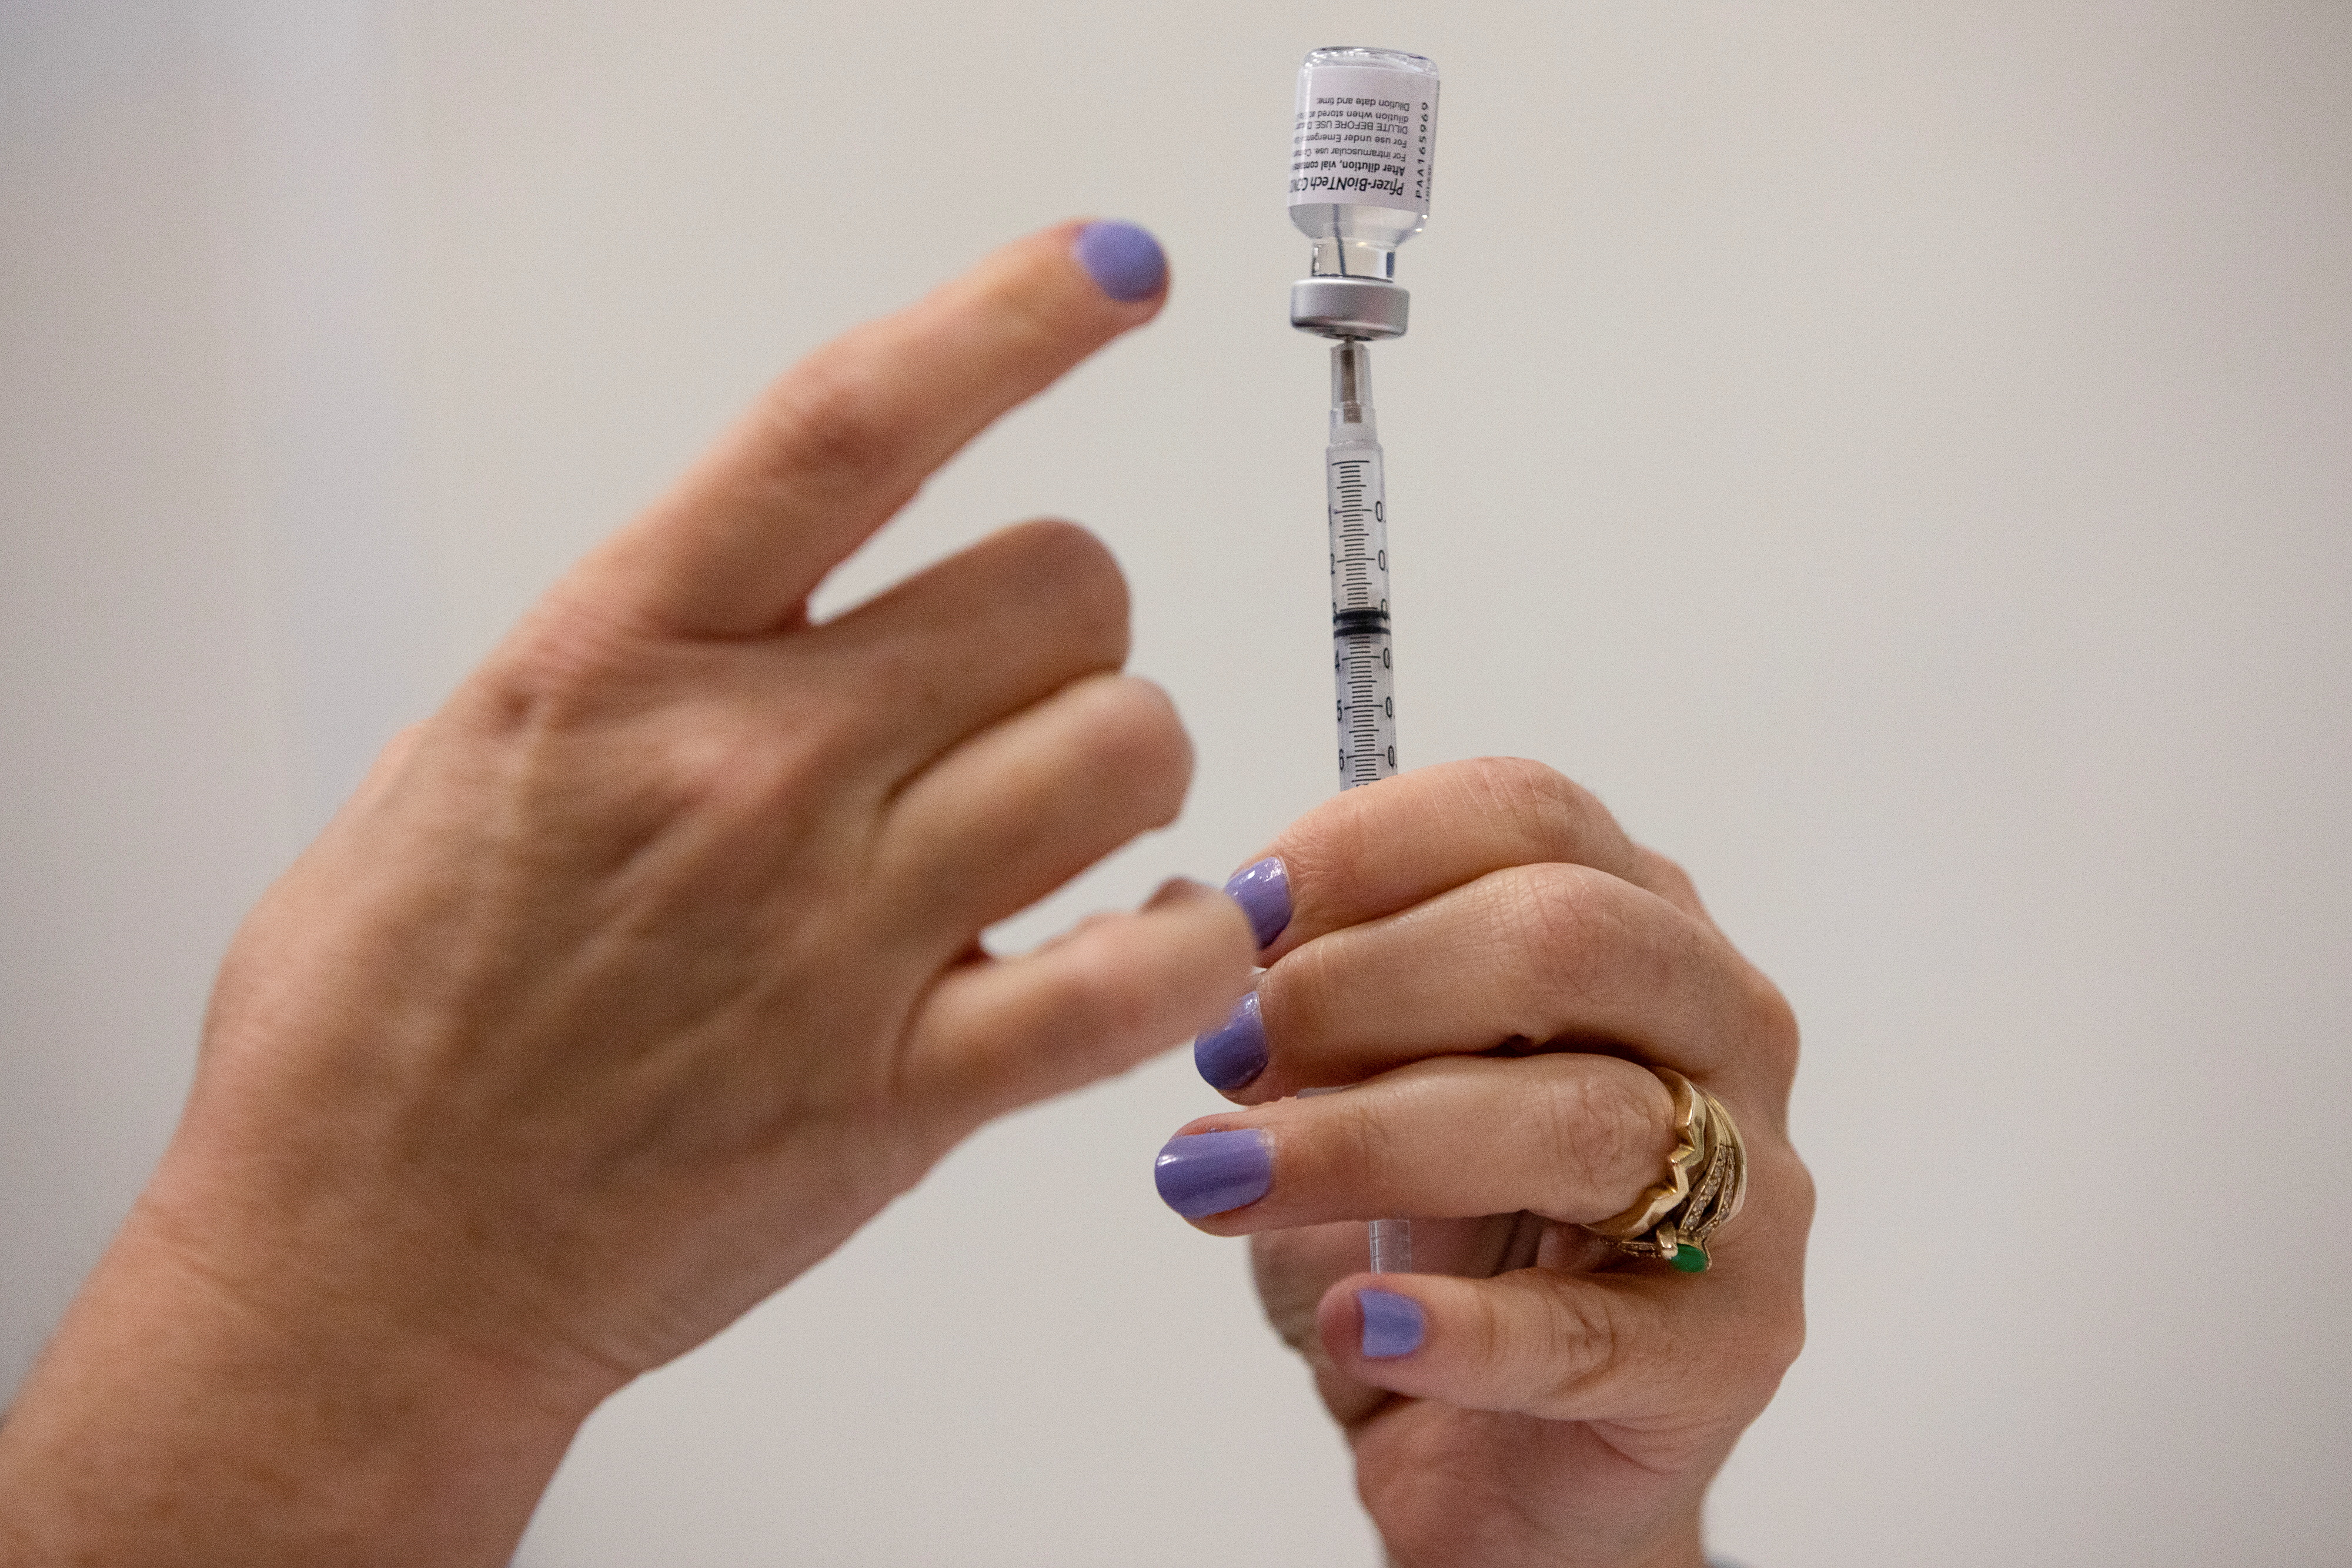 A nurses fills up syringes for patients as they receive their coronavirus disease (COVID-19) booster vaccination during a Pfizer-BioNTech vaccination clinic in Southfield, Michigan, U.S., September 29, 2021. REUTERS/Emily Elconin